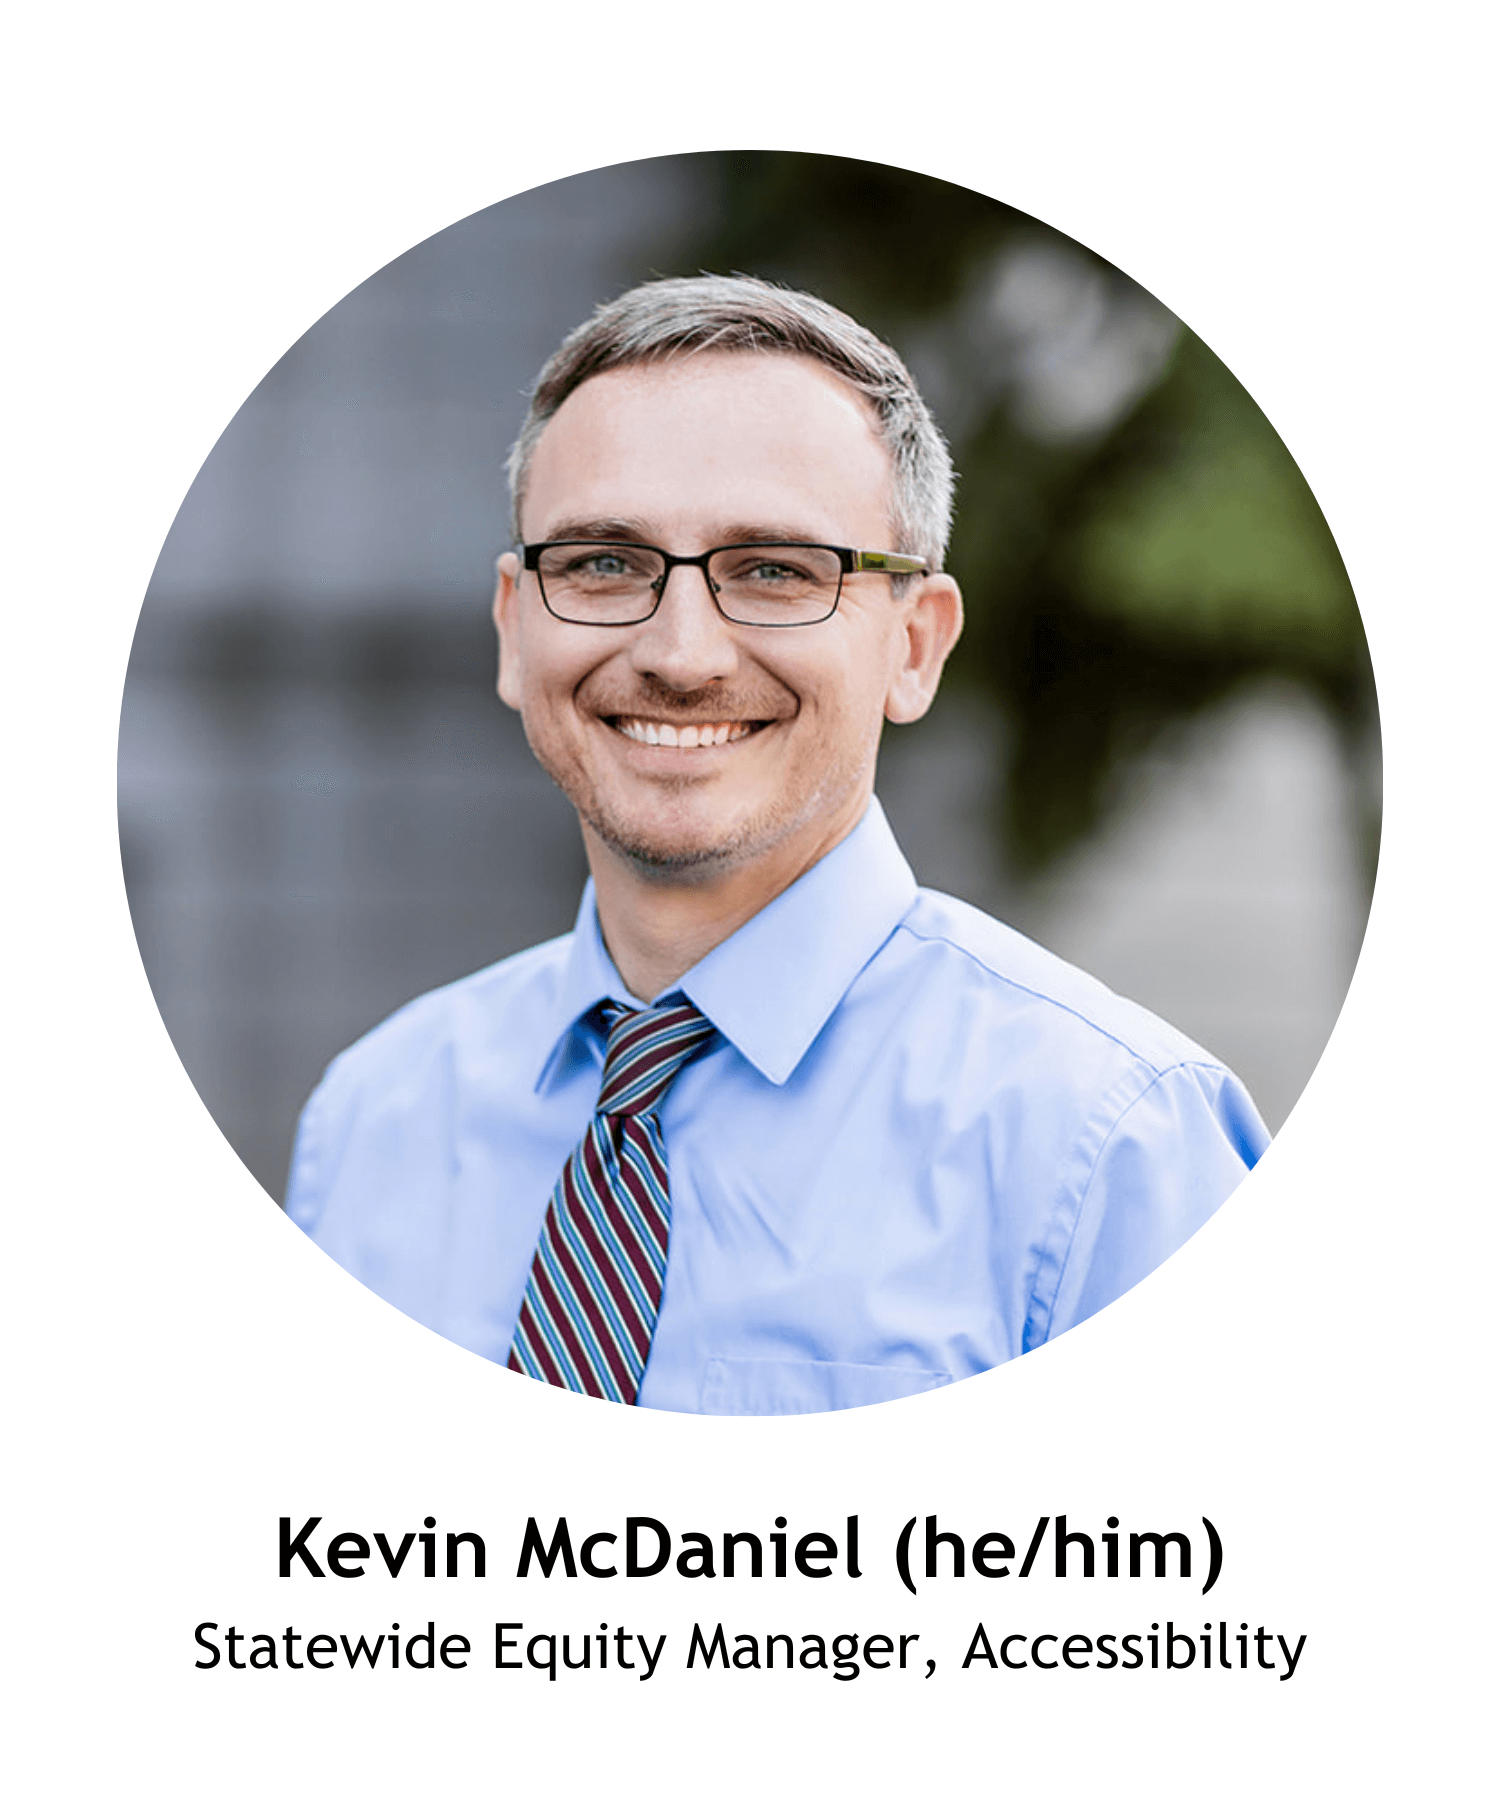 Kevin McDaniel (he/him), Statewide Equity Manager, Accessibility